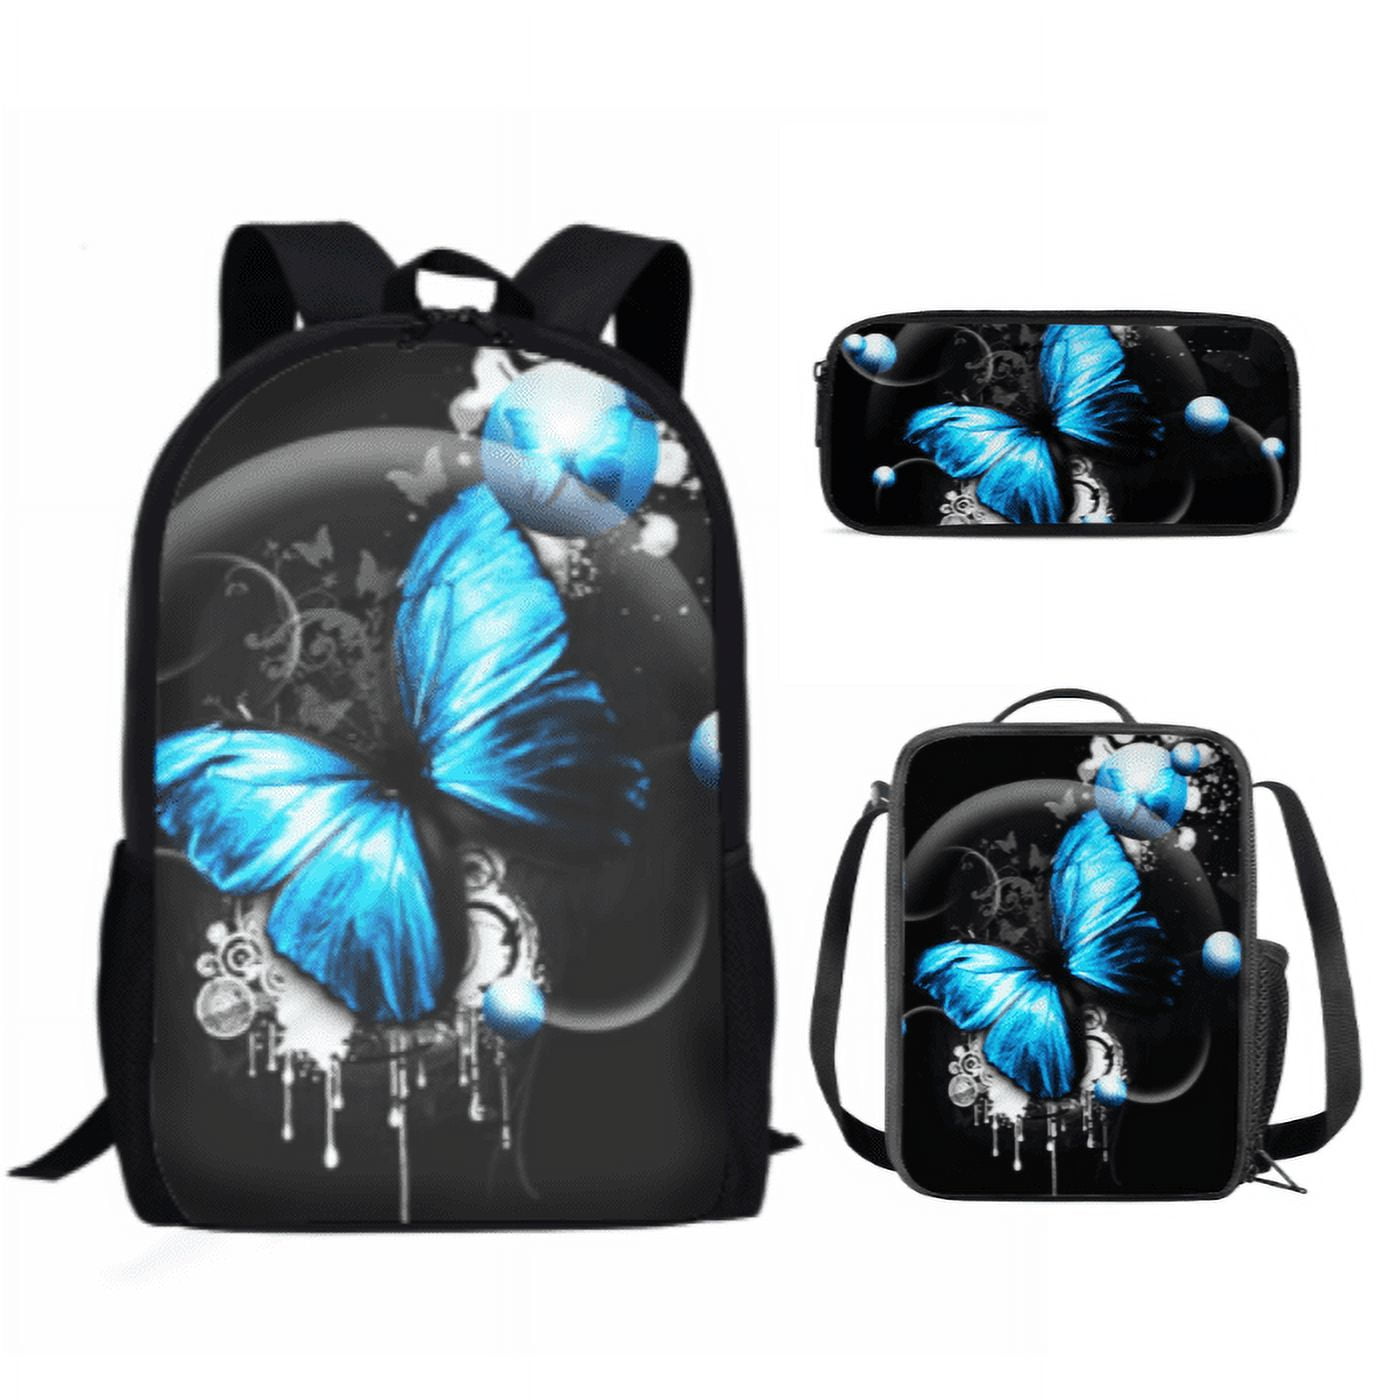  Beauty Collector Cool Blue Galaxy Cat Backpacks Boys School Bag  Set Personalized for Teens Book Bags with Lunch Bag and Pencil Case : Home